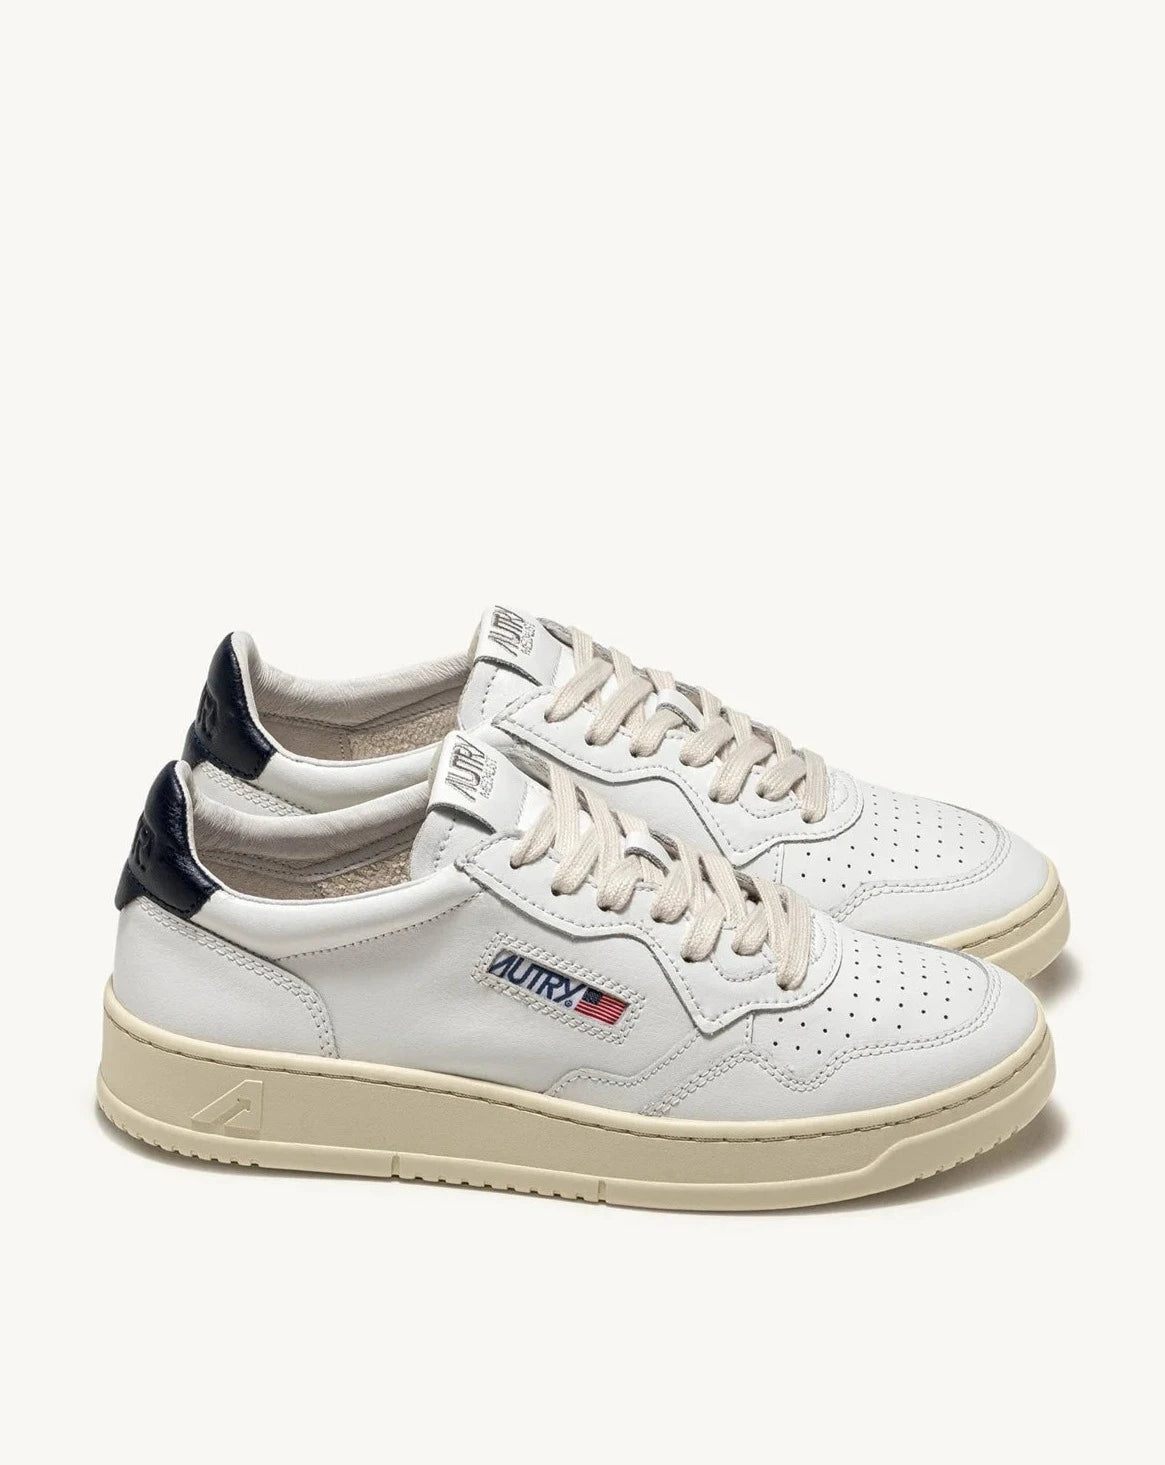 Autry LL12 White/Space sneakers